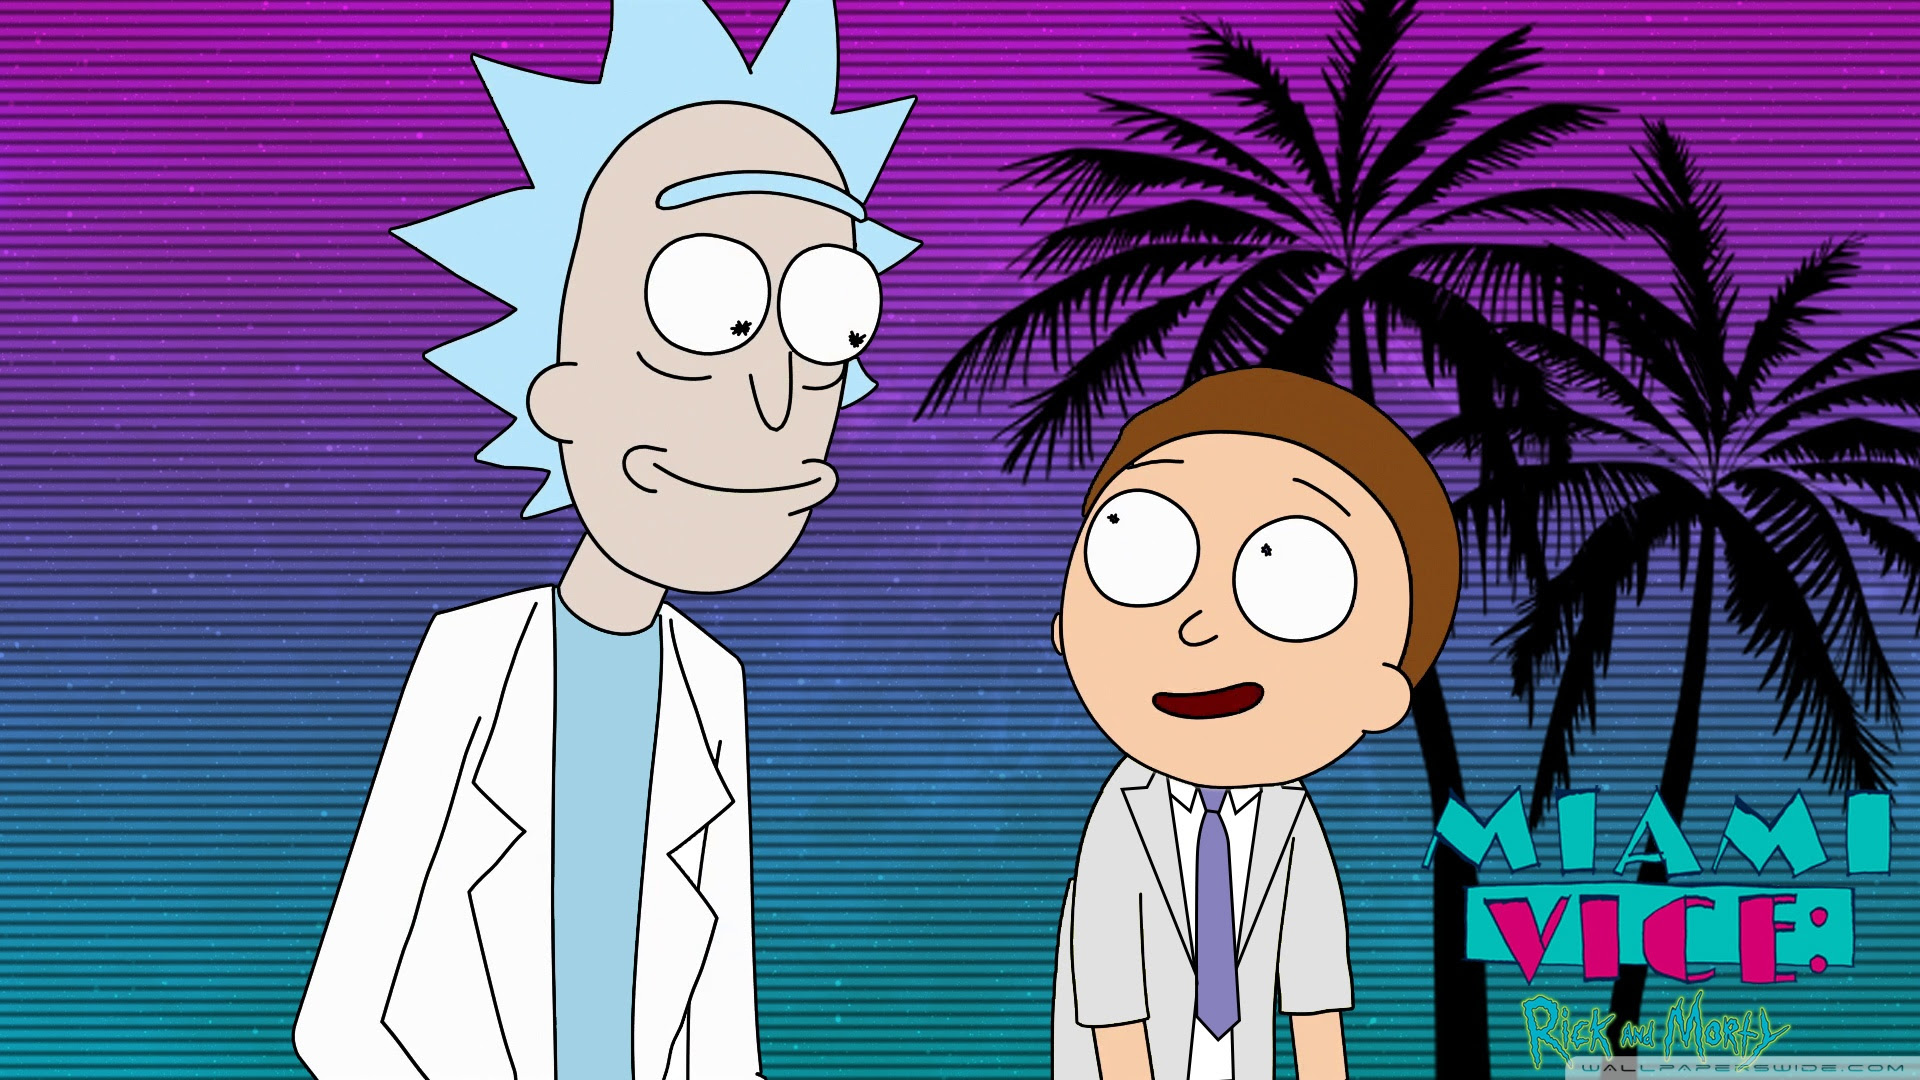 Rick and morty animated wallpaper. 